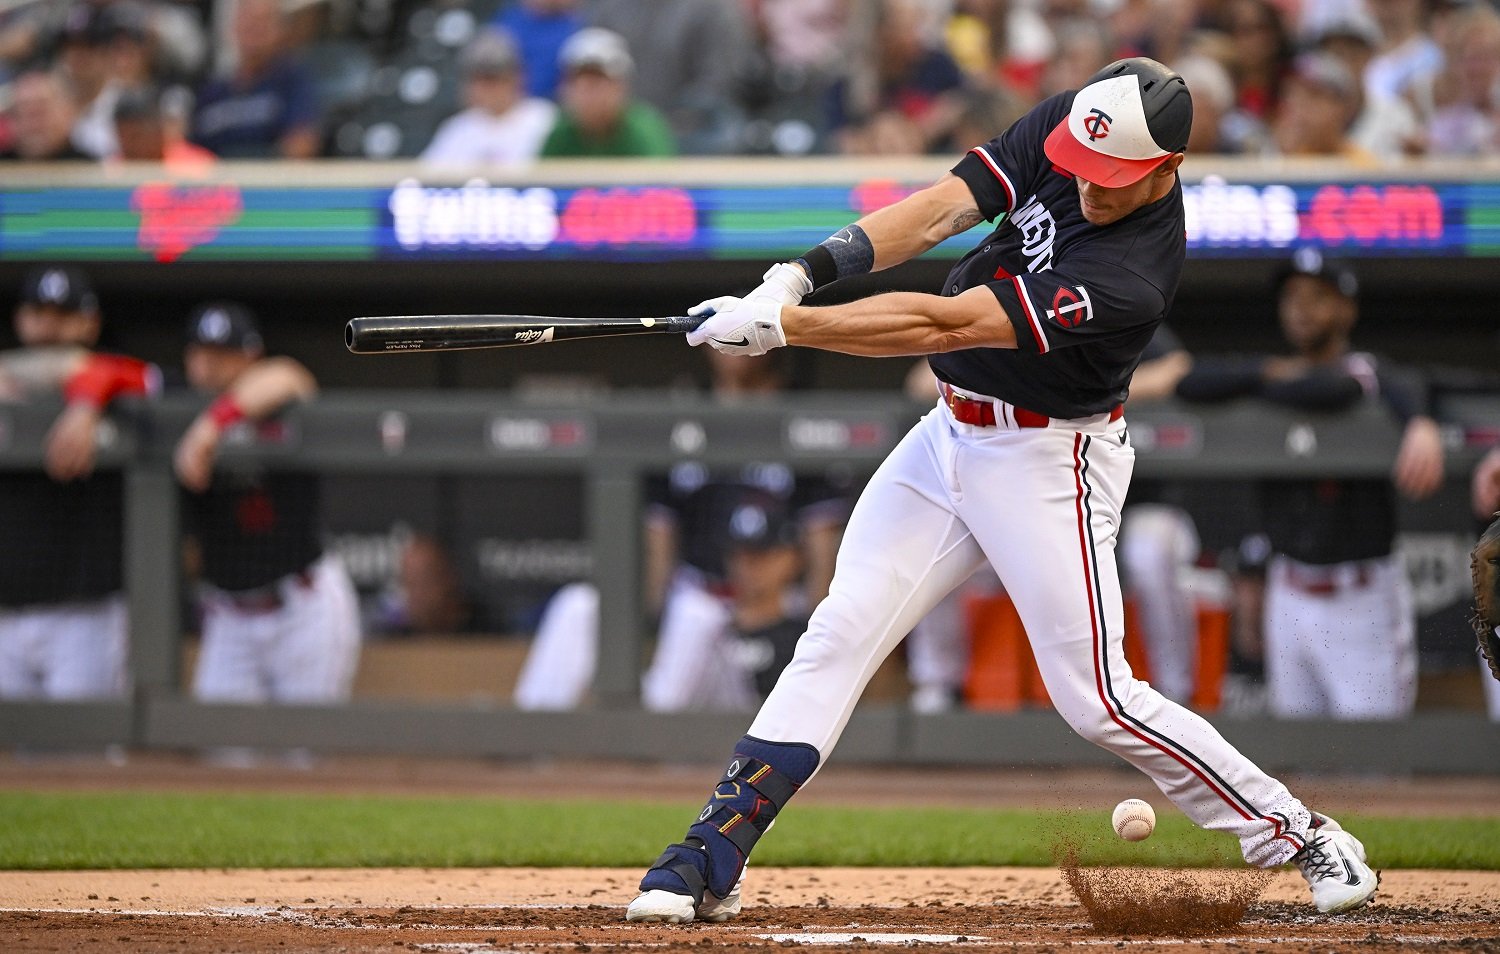 Twins squander two-run lead in bizarre 10th inning, lose 5-4 to